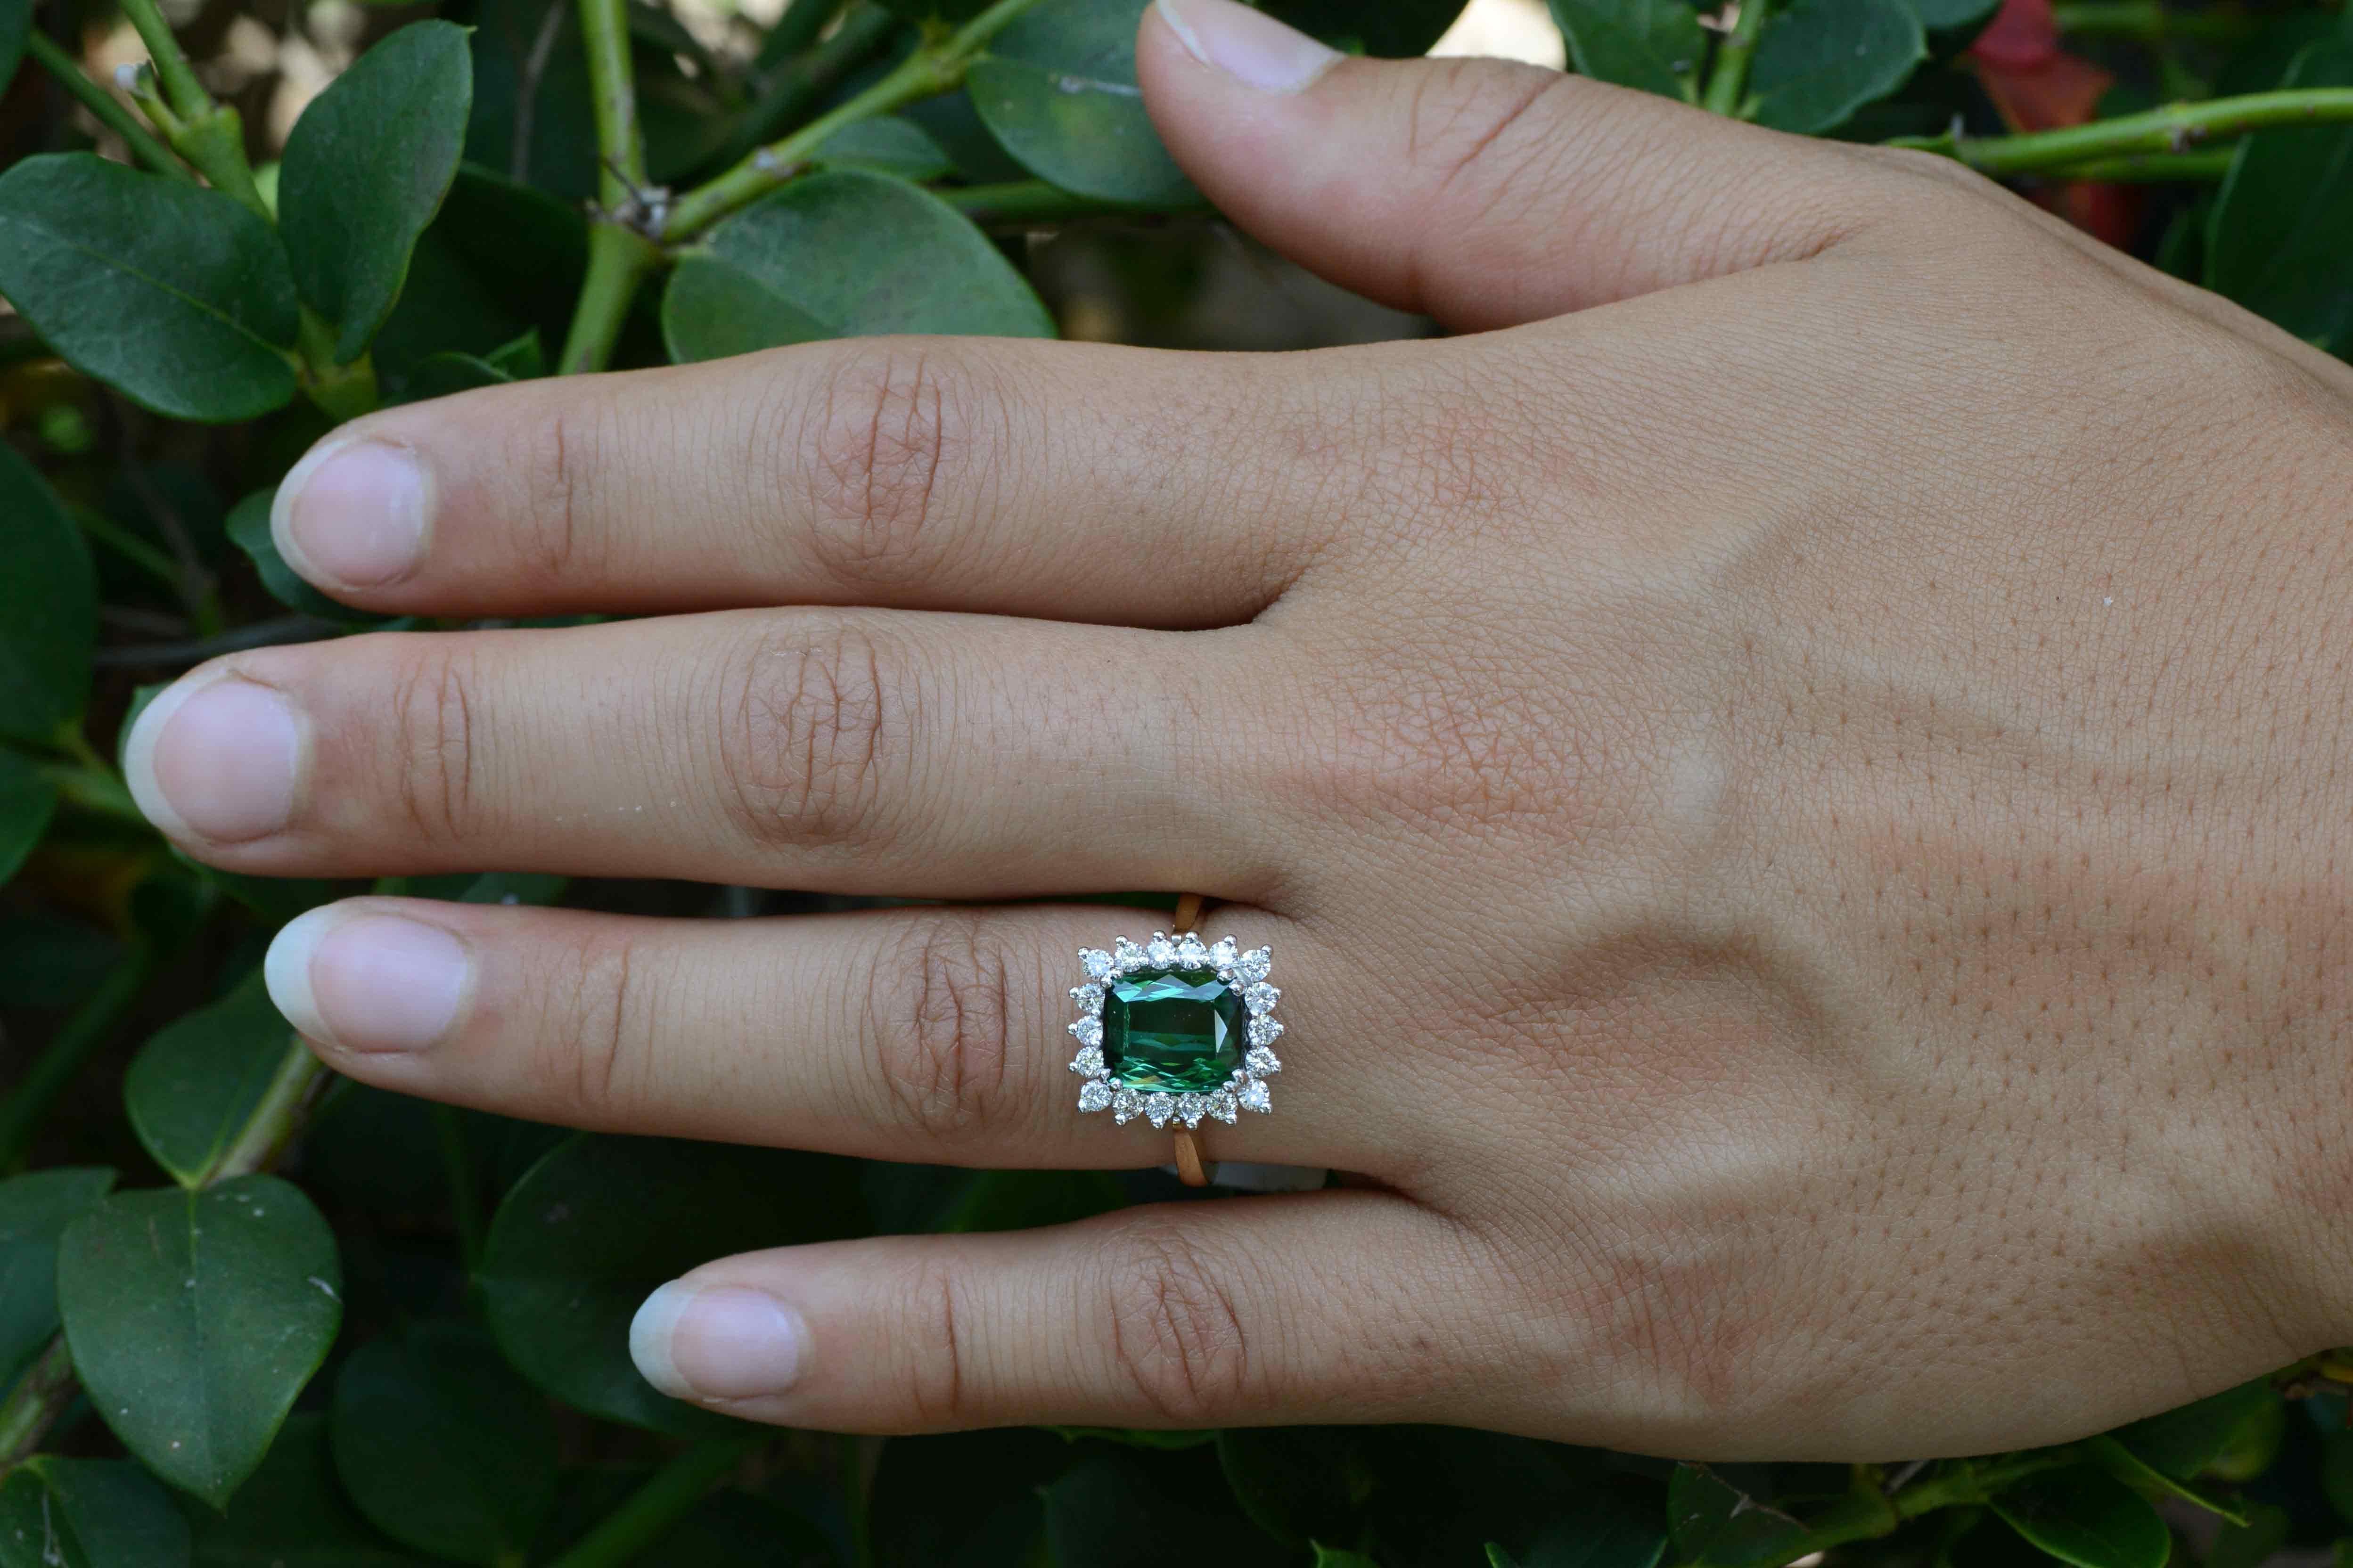 This amazingly beautiful, lively and lustrous green Tourmaline of 3.40 carats makes for a wonderful gemstone engagement ring. Set atop a white gold basket that allows the light to penetrate it from all angles and rendered in a timeless Princess